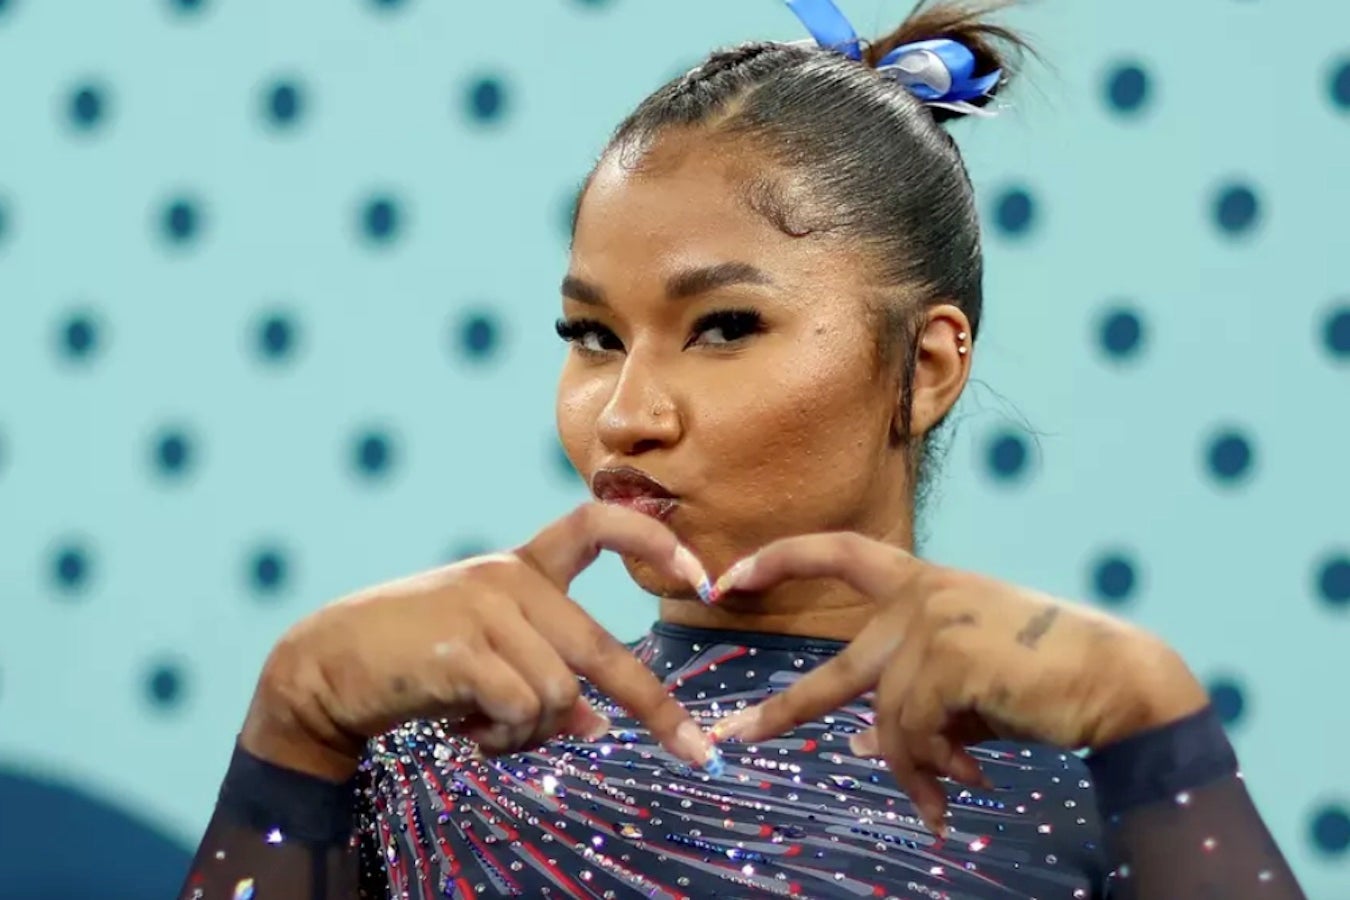 Gymnast Jordan Chiles makes a heart sign with her hands